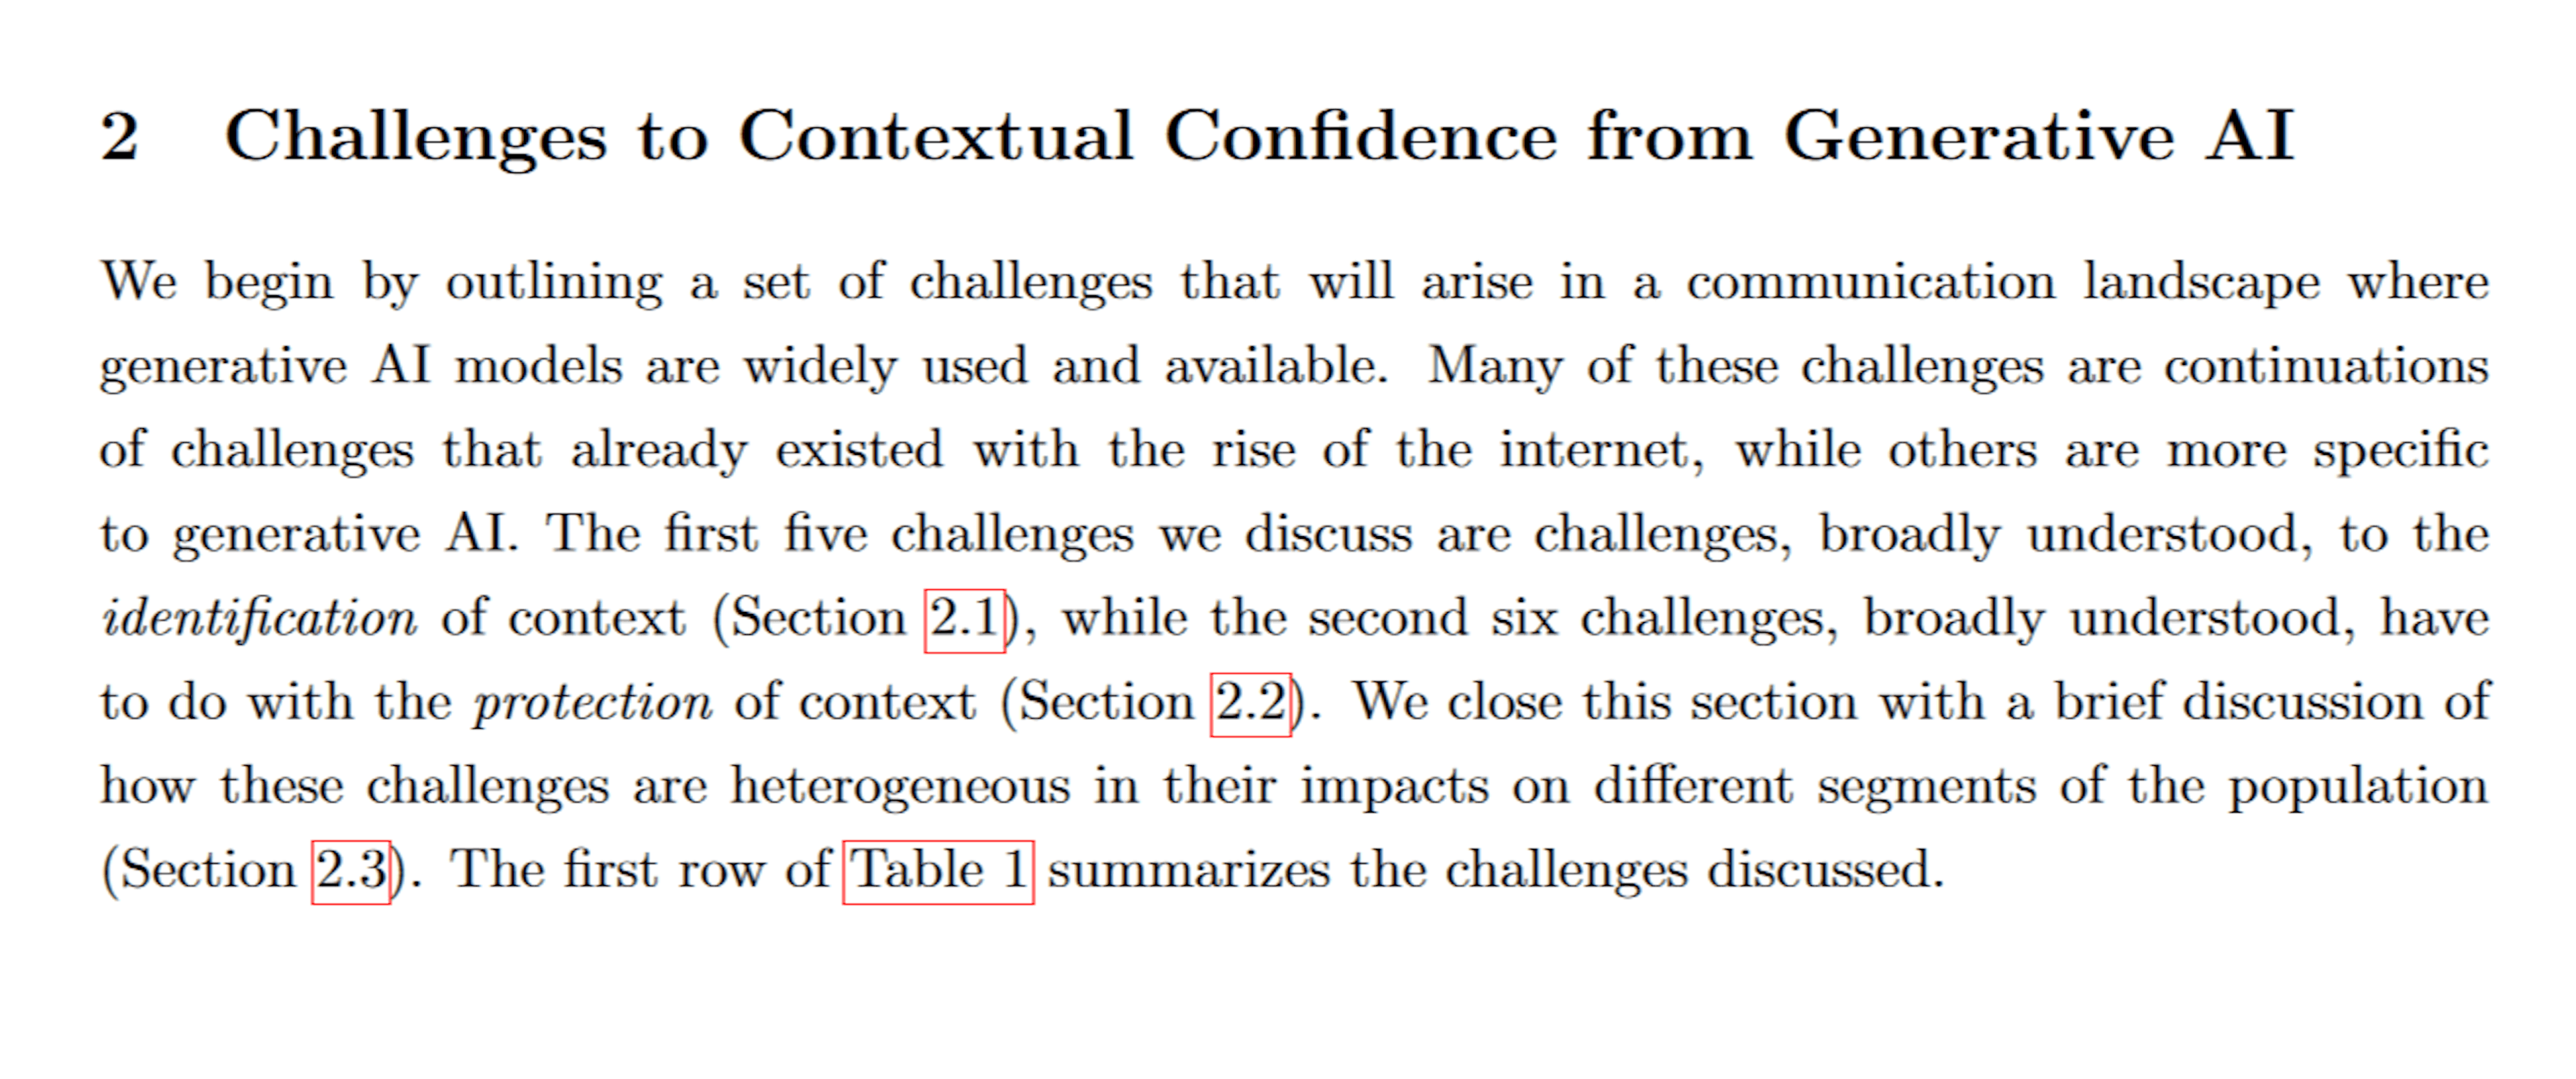 featured image - Generative AI and Contextual Confidence: Challenges to Contextual Confidence from Generative AI